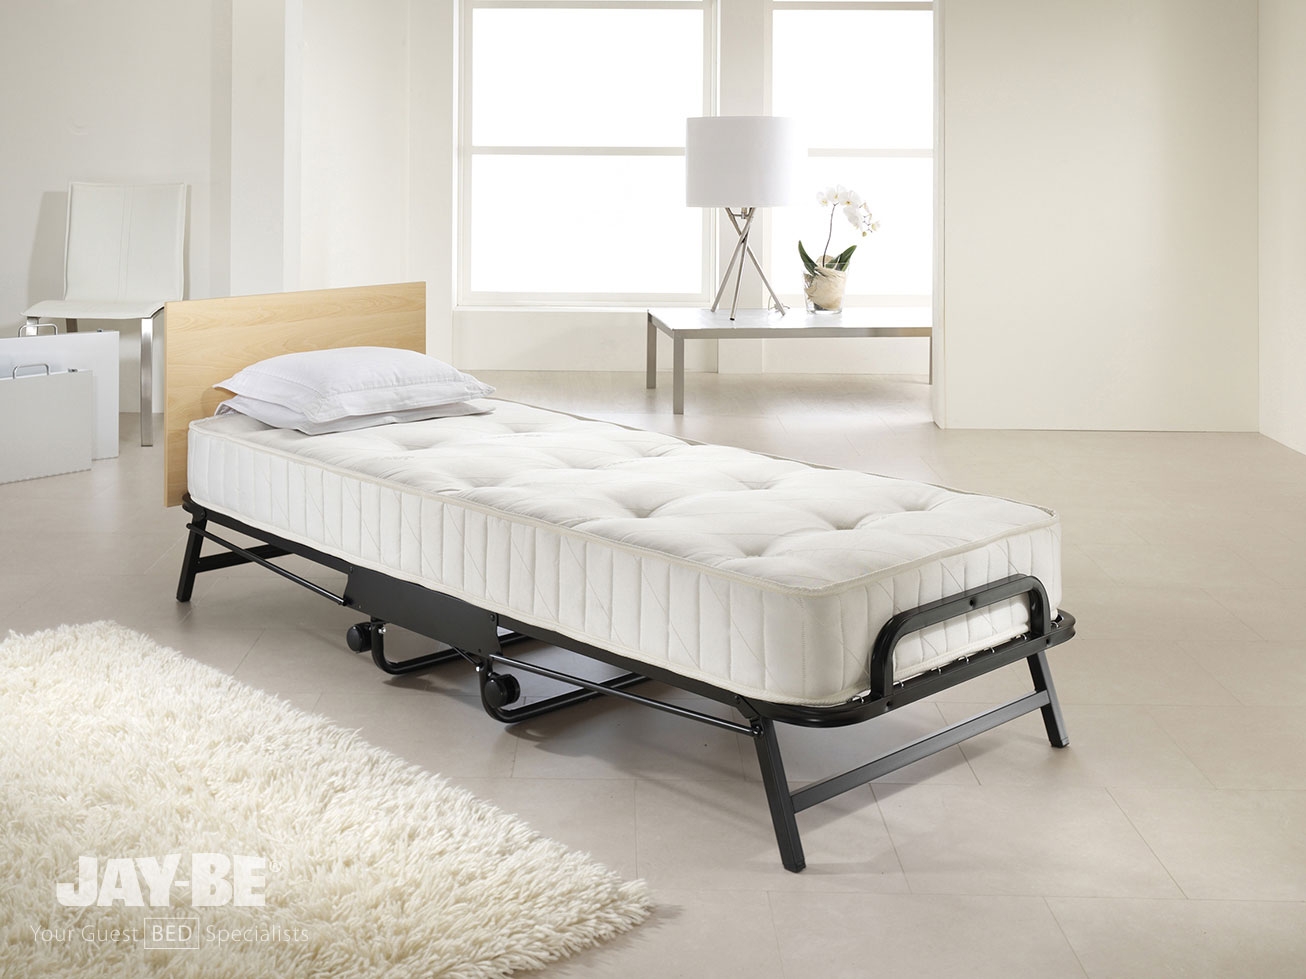 Jay-Be Crown Premier Single Folding Bed with